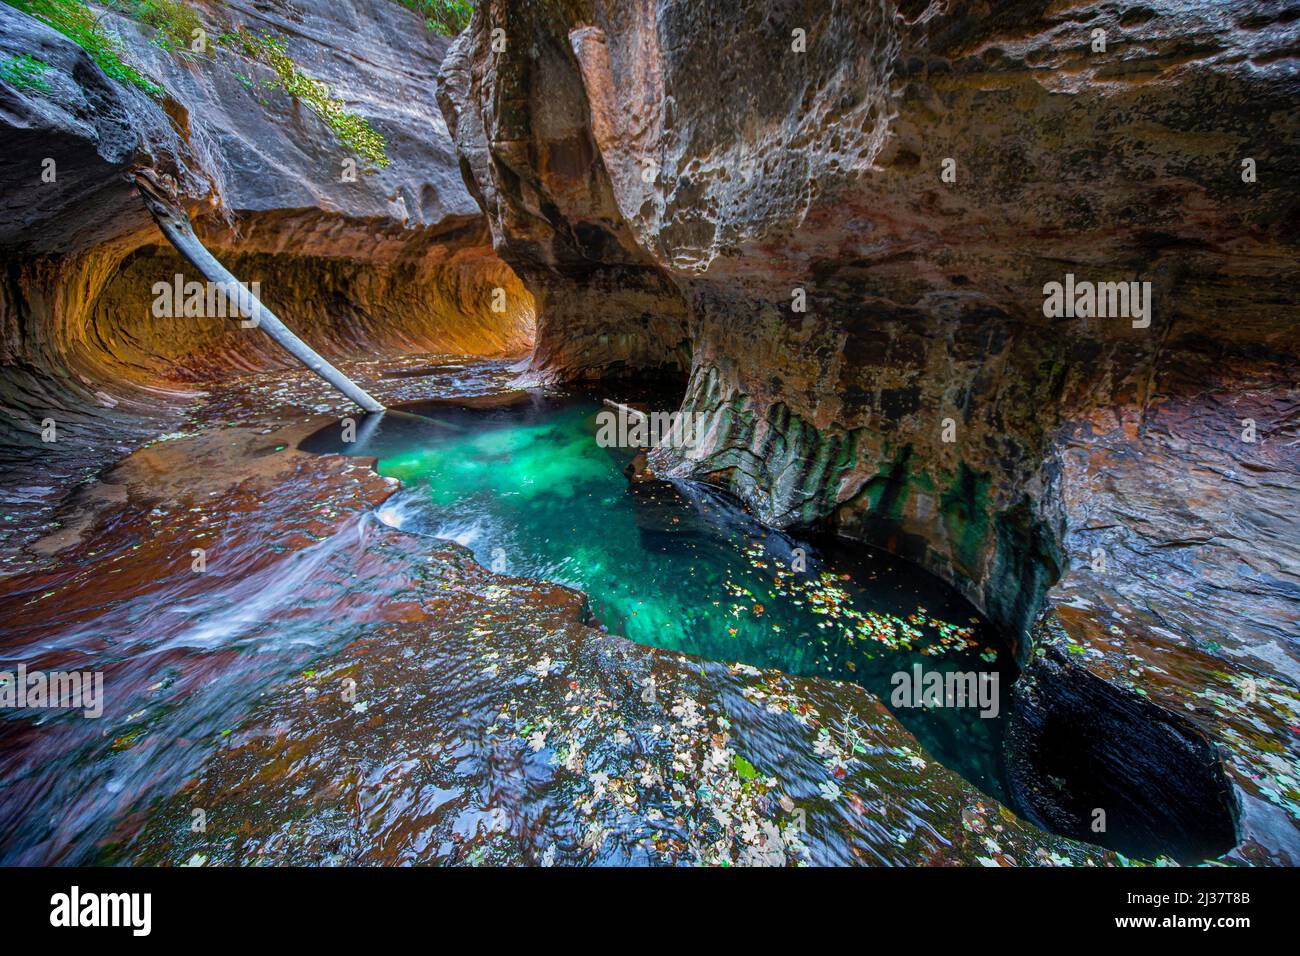 Erosion has shaped the sandstone walls at The Subway at Zion National Parkâ.s Left Fork of North Creek. Stock Photo